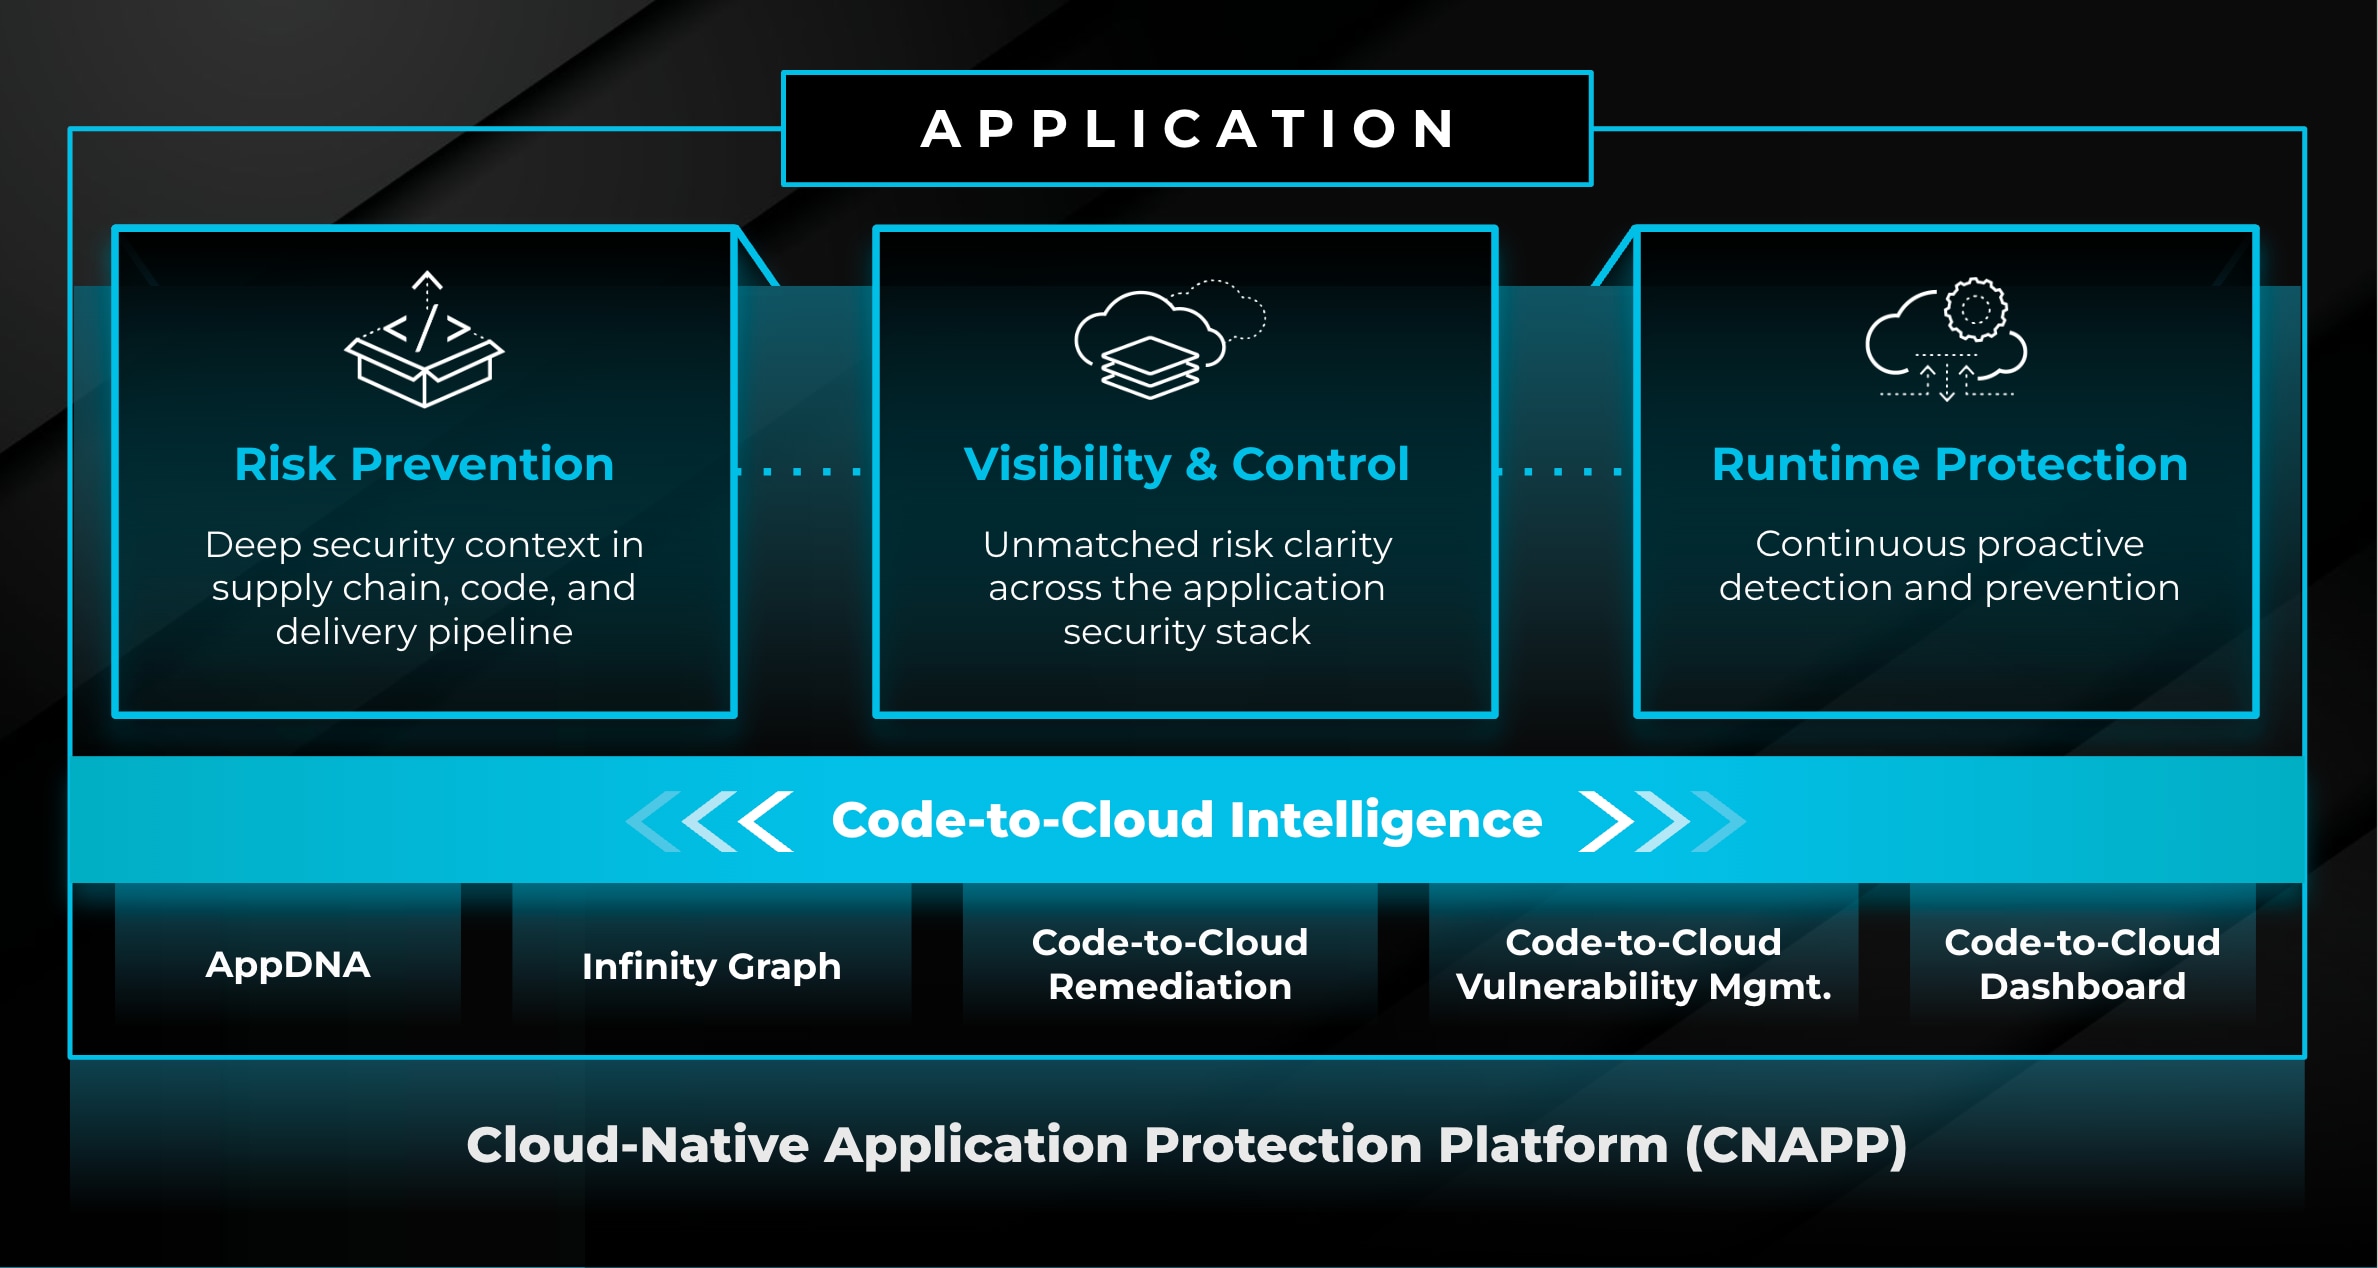 Code-to-Cloud intelligence application, showing AppDNA, Infinity Graphy, Remediation, Vulnerability Mgmt, and the dashboard. 